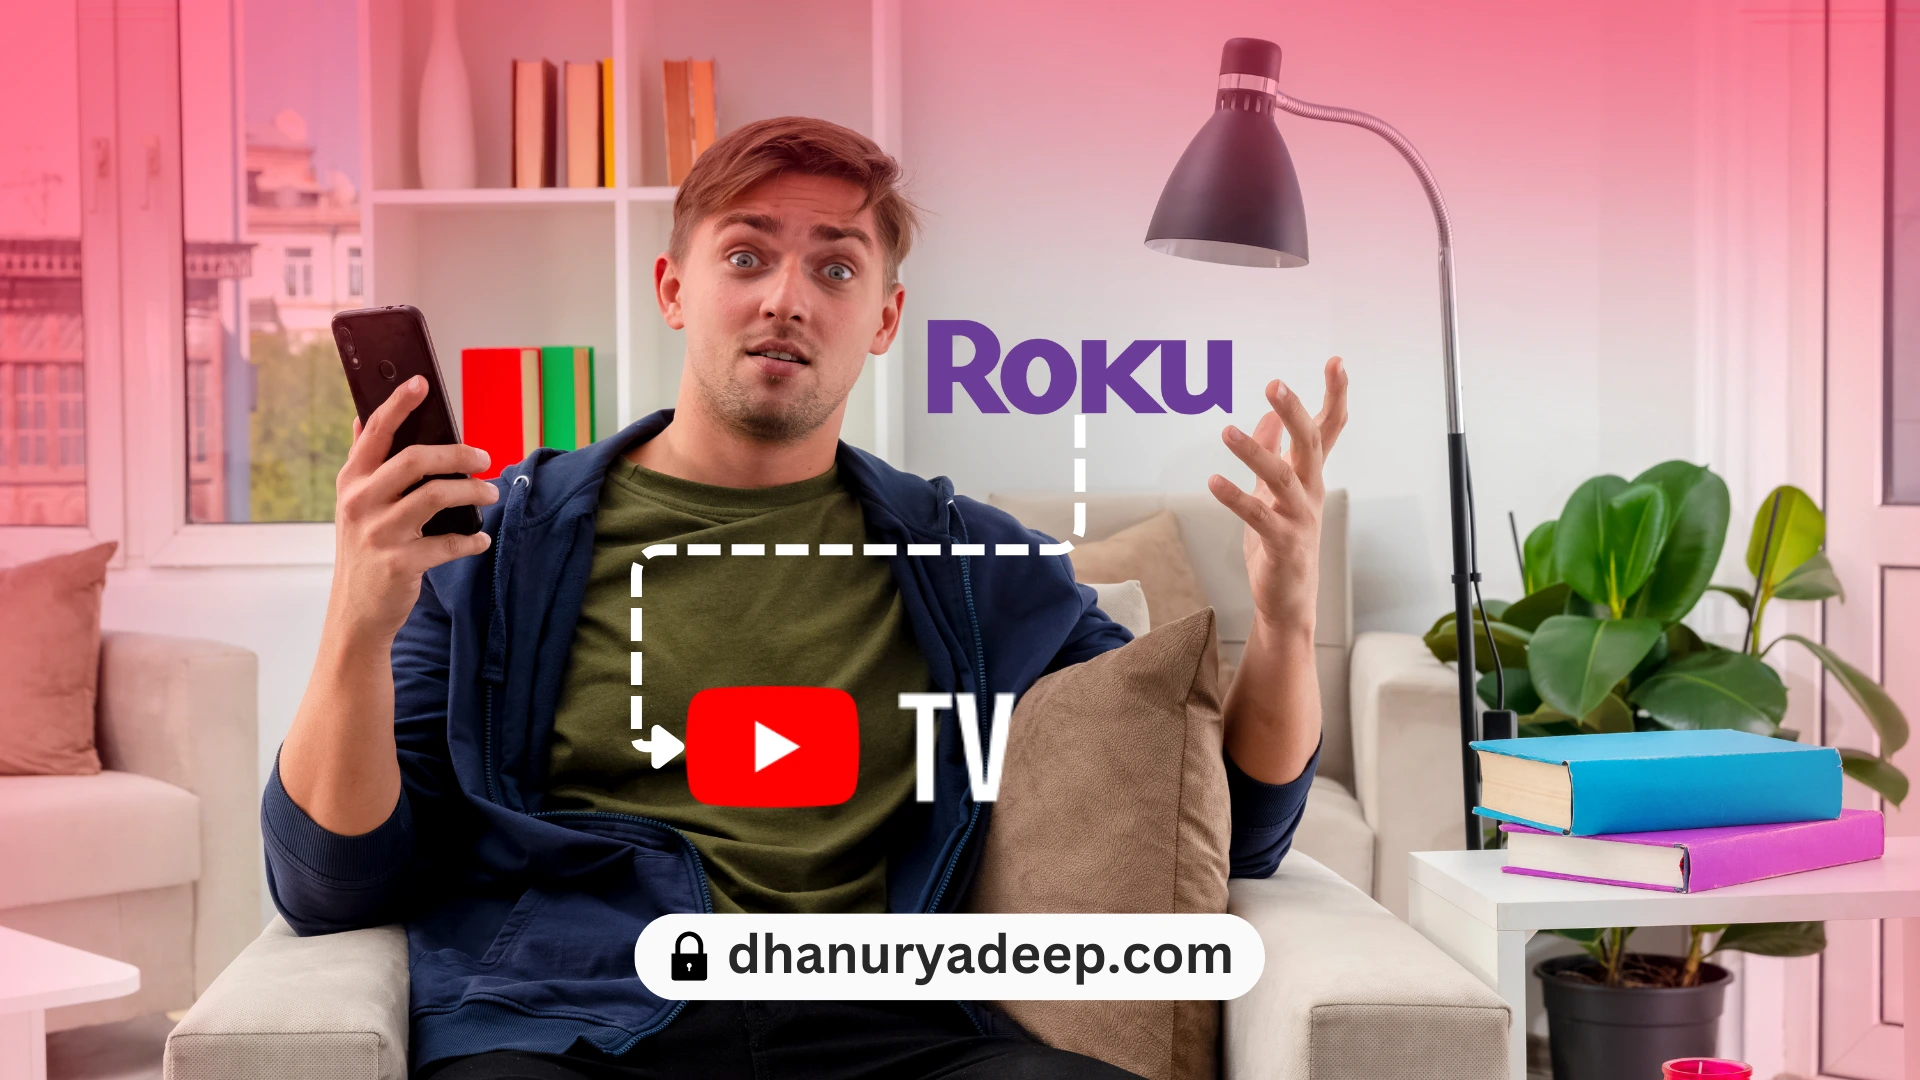 How to Activate YouTube TV on Roku